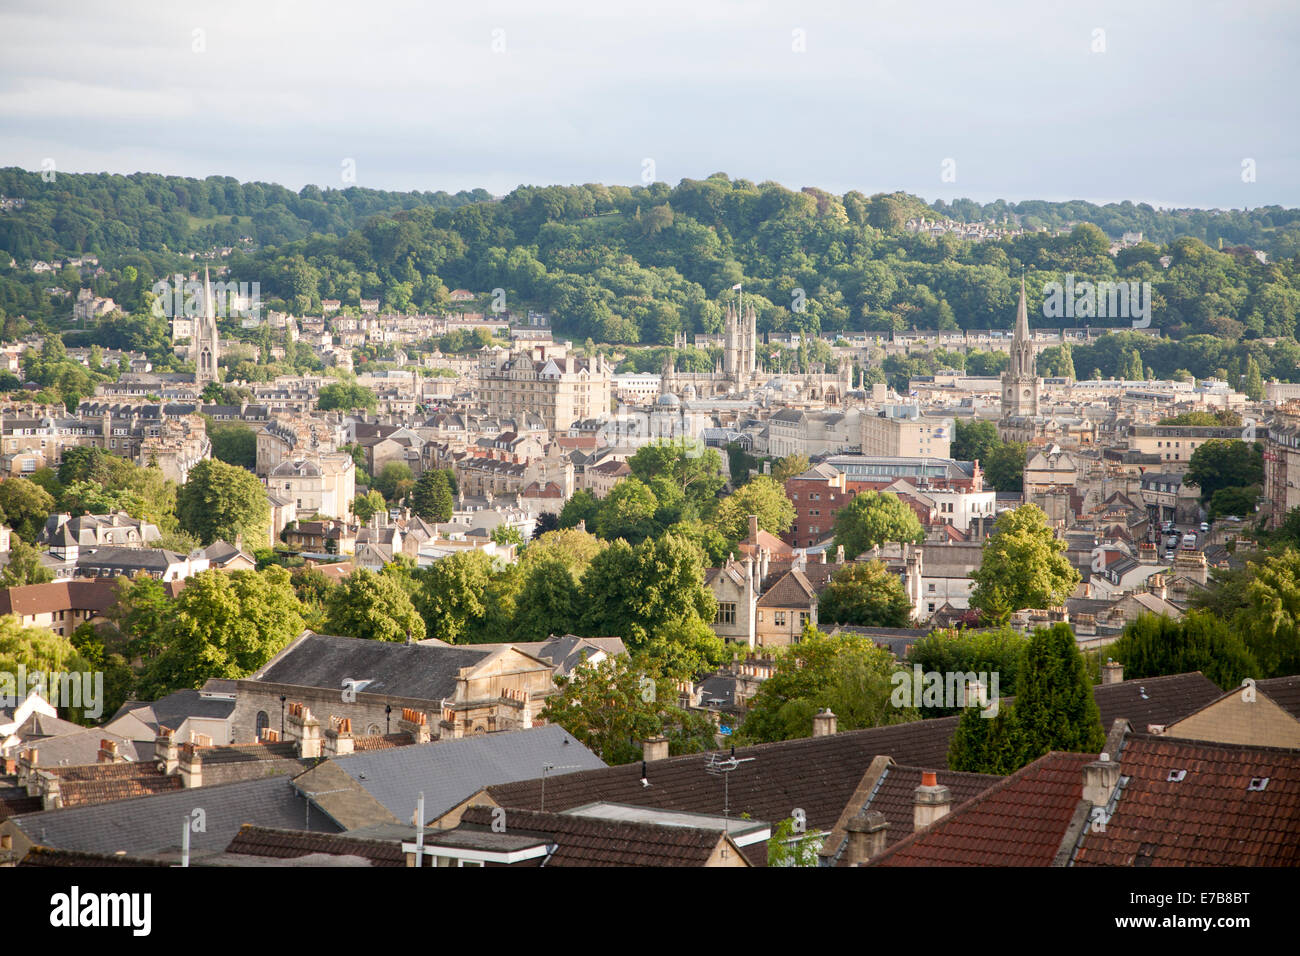 View over the city centre of Bath, north east Somerset, England Stock Photo